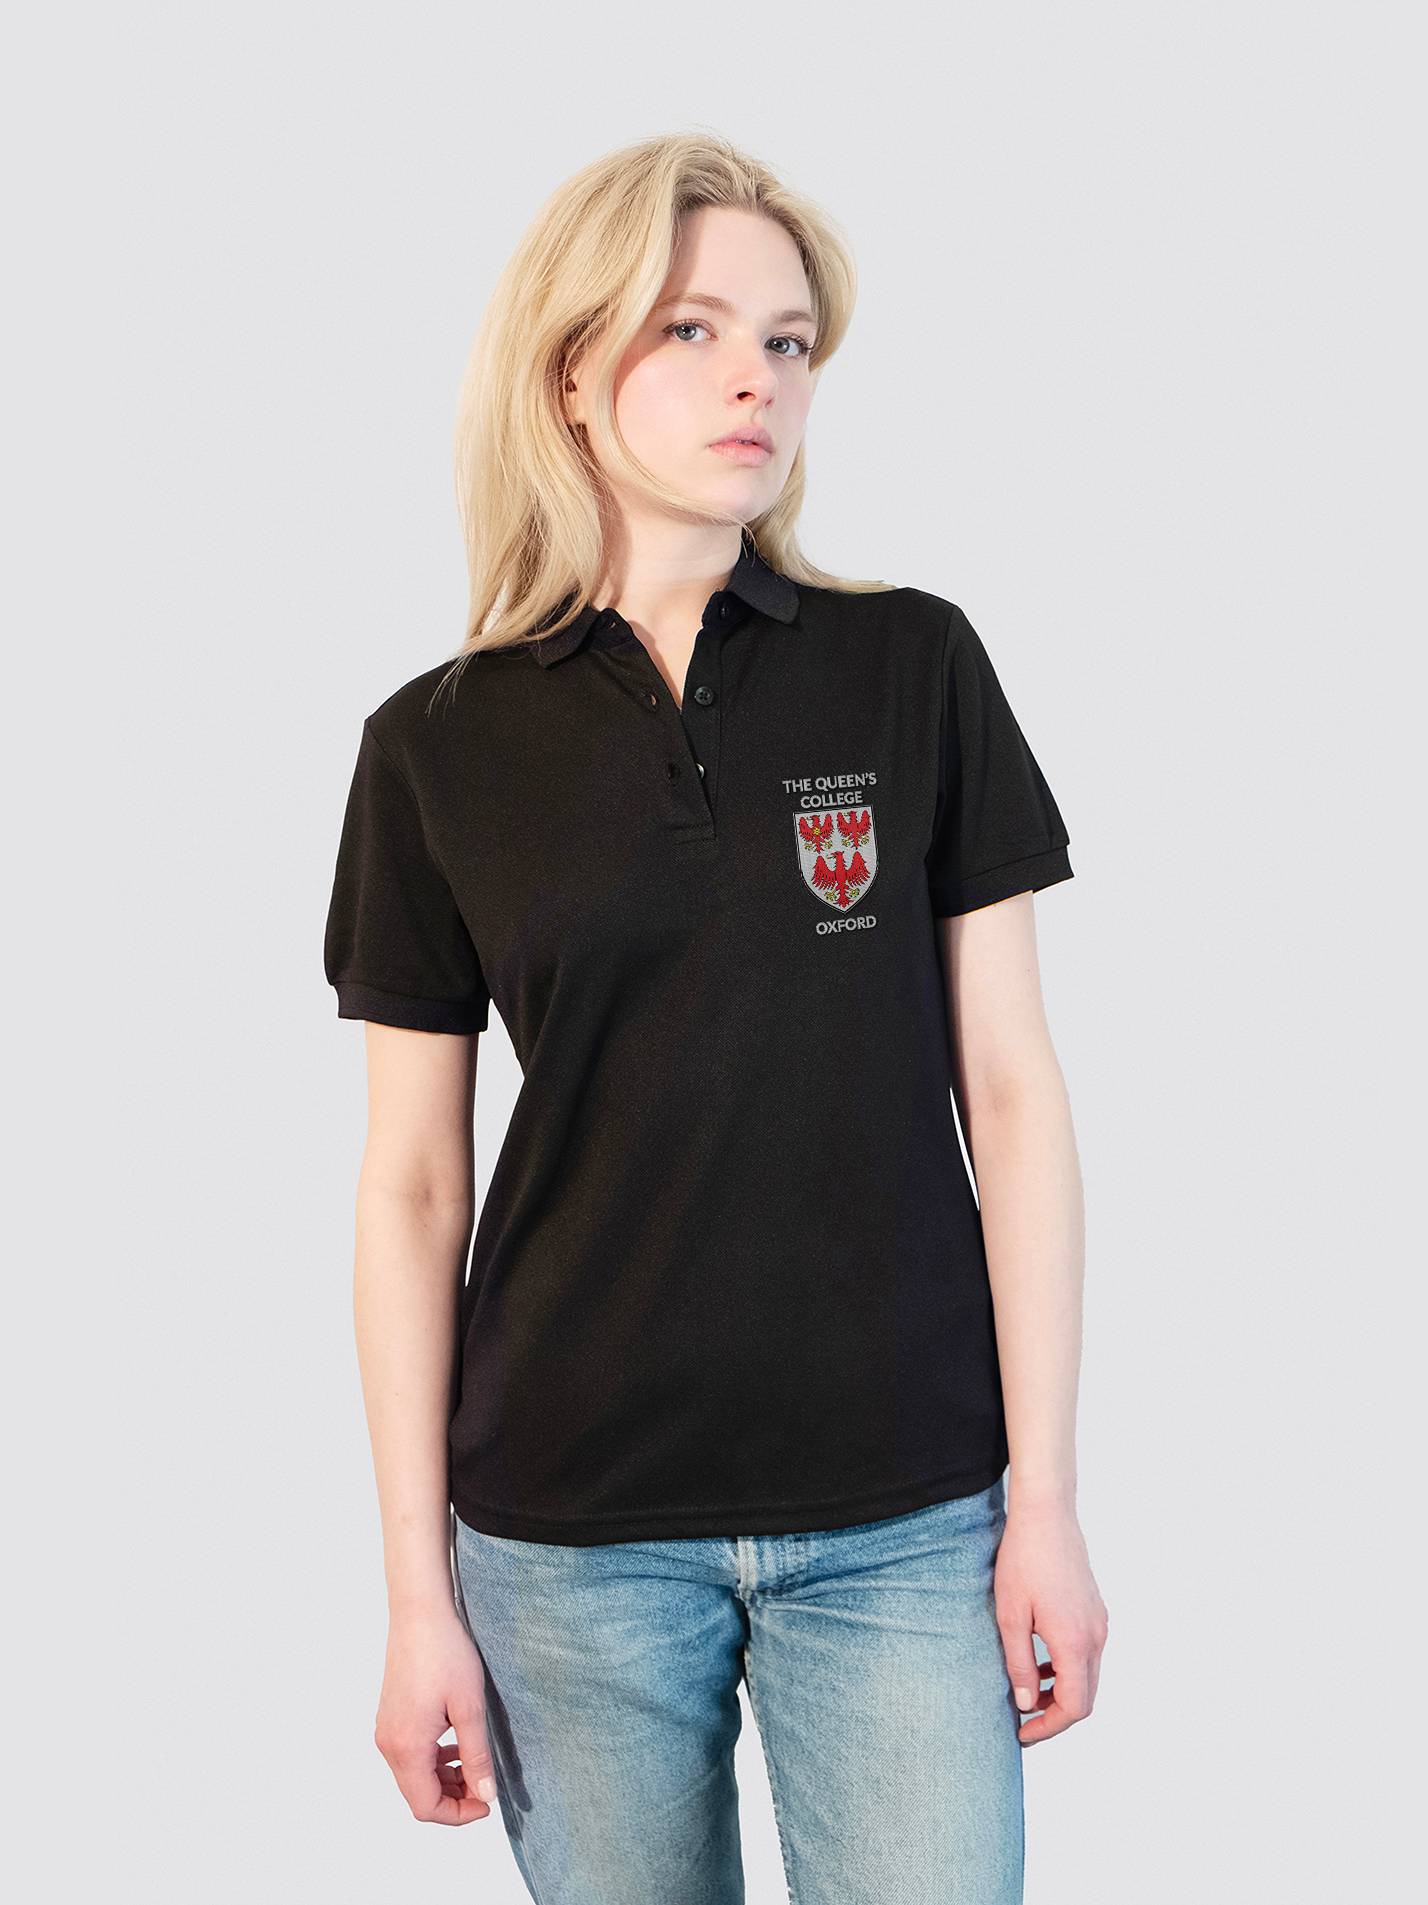 The Queen's College Oxford MCR Sustainable Ladies Polo Shirt